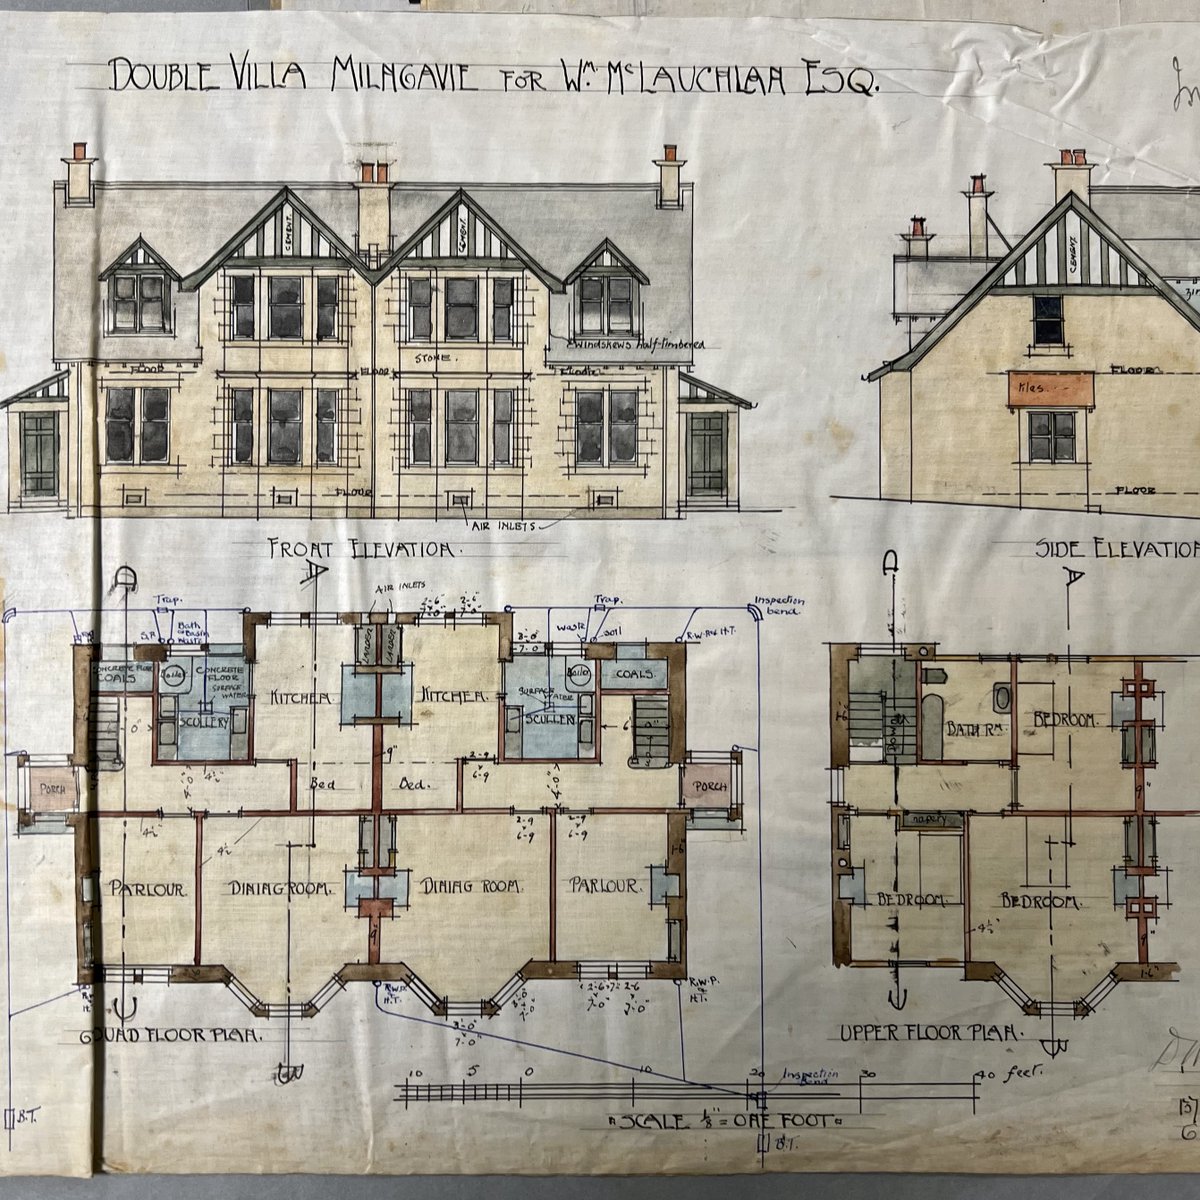 Looking through our archive plans for an enquiry this week we spotted this lovely Milngavie double villa from 1905. No street name on it though - does it look familiar to anyone? 

#Archives #Architecture #BuildingPlan #Milngavie